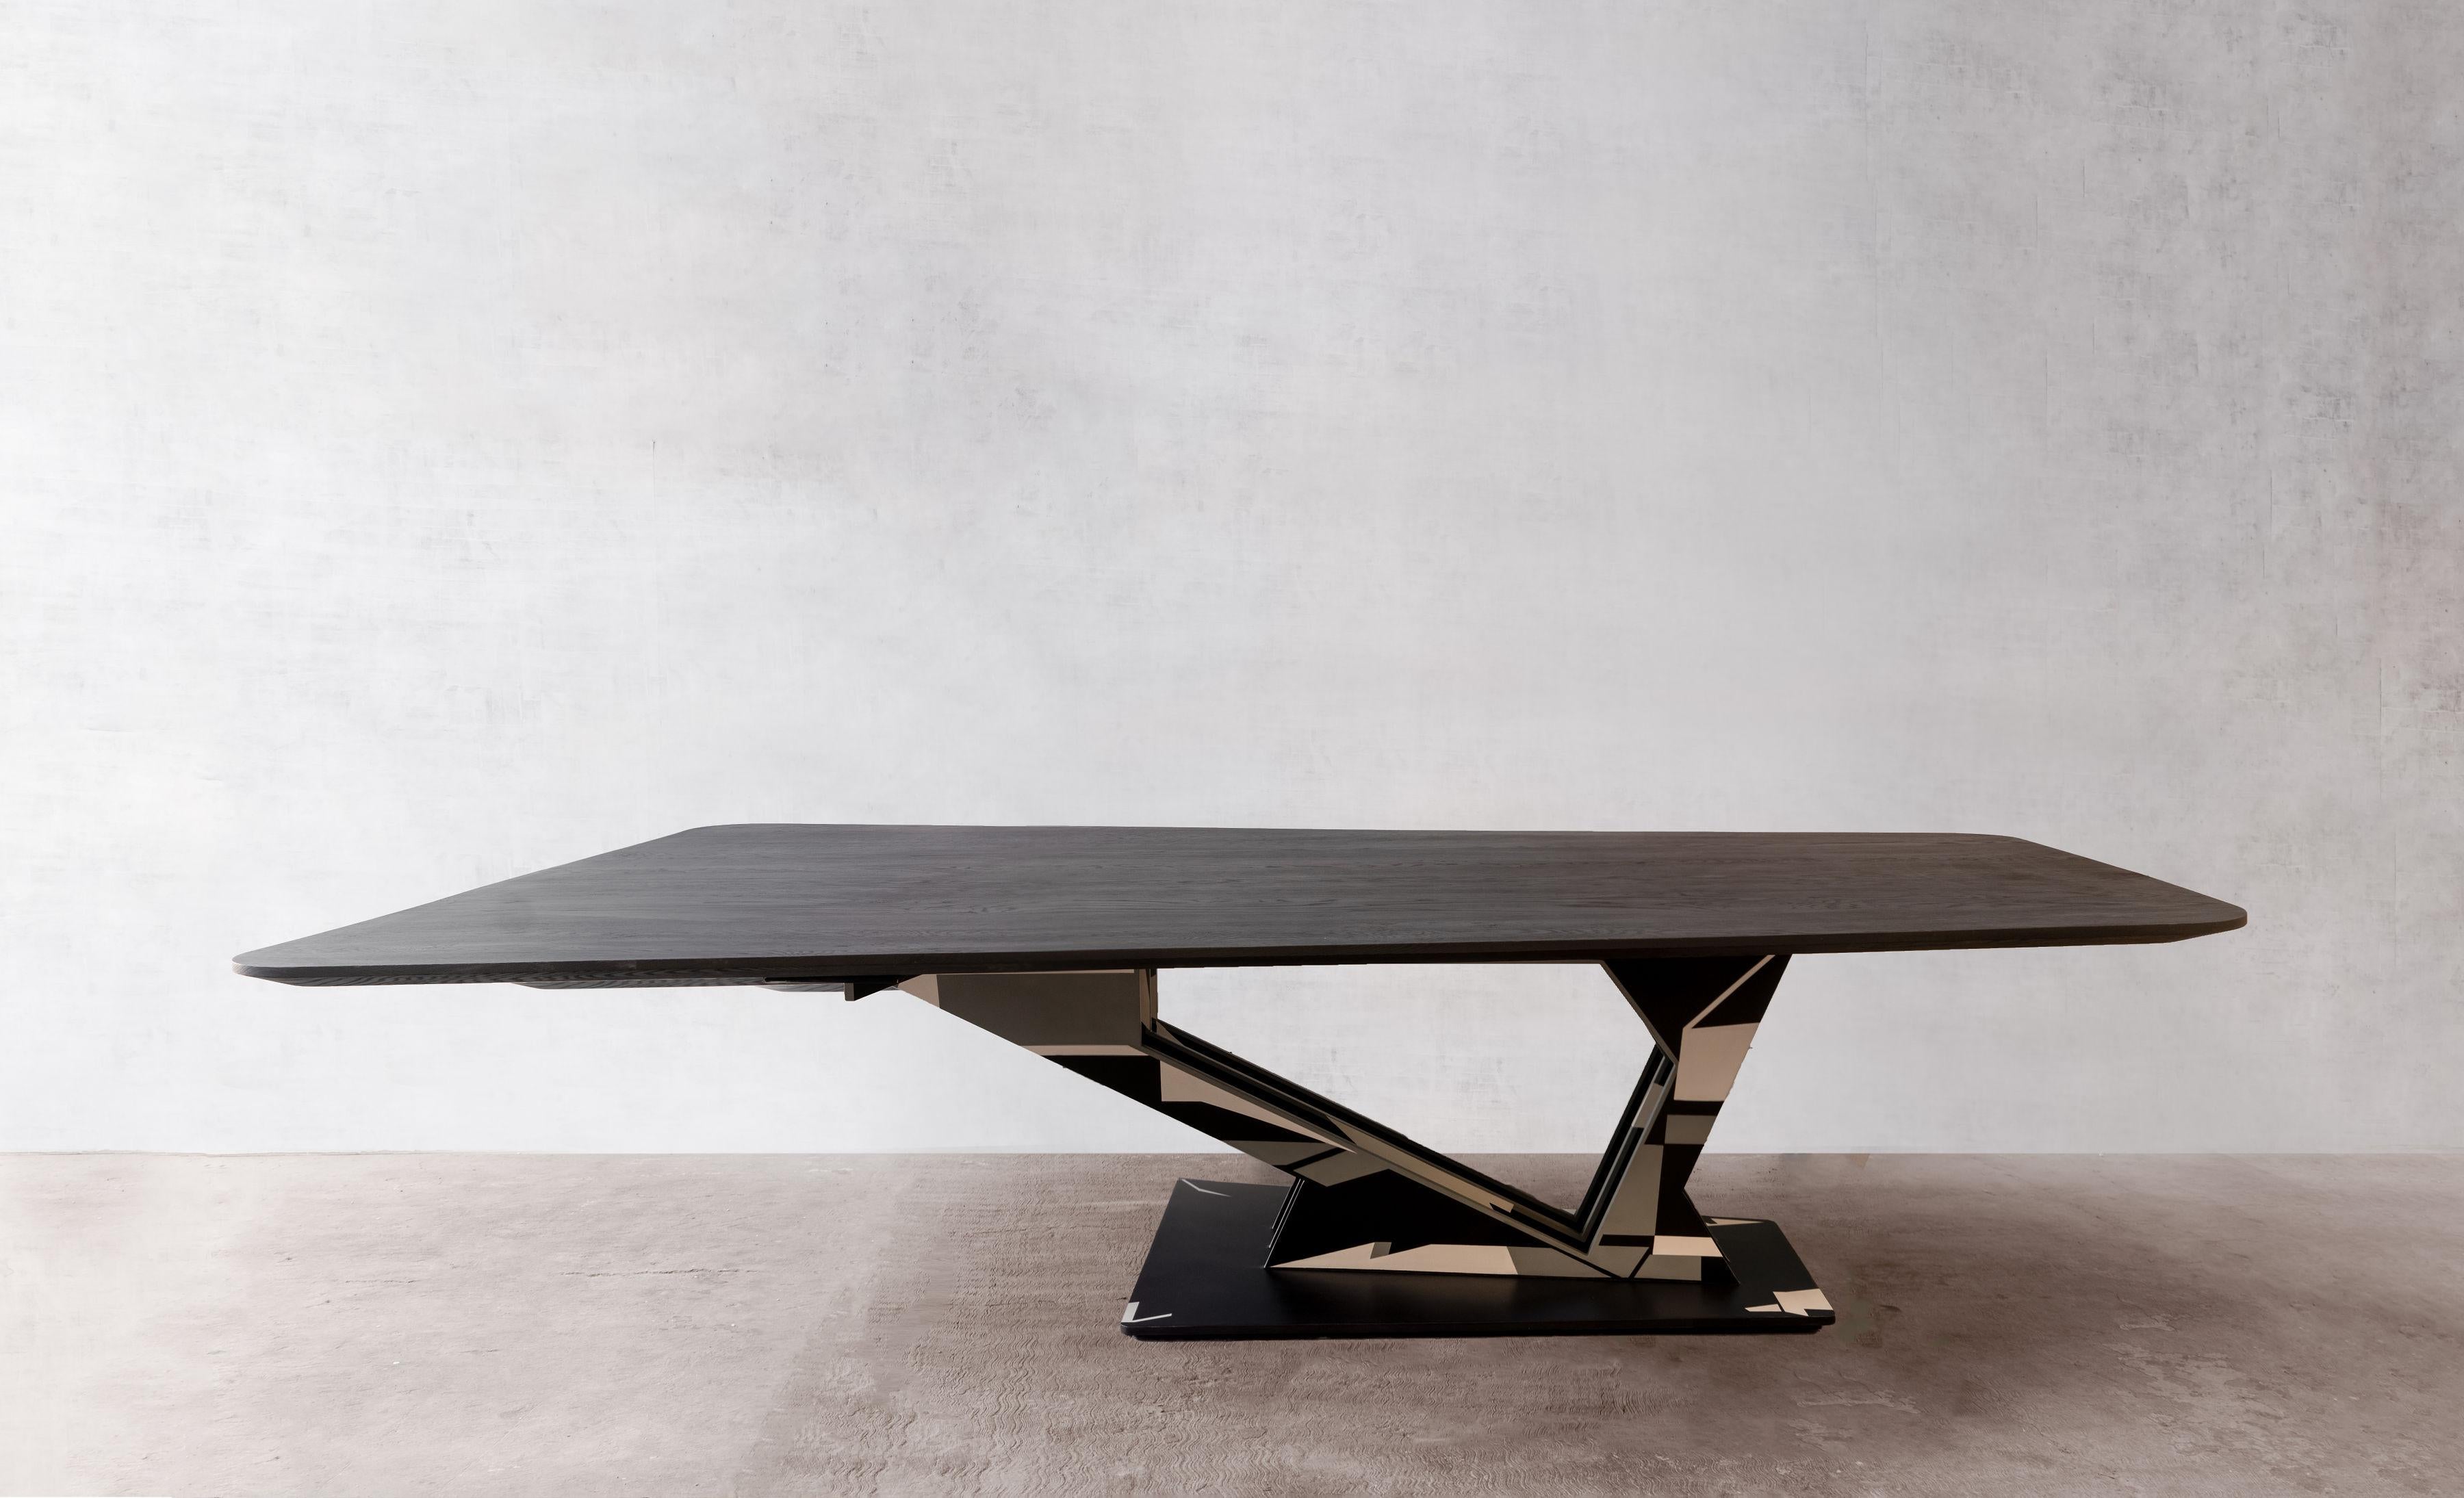 Ecliptic table by Arturo Verástegui
Dimensions: D 240 x W 100 x H 55 cm
Materials: oak wood, stainless steel.

Dining table made of burnt white oak and steel plate pedestal intervened by the master Raymundo Sesma.

Arturo Verástegui has been